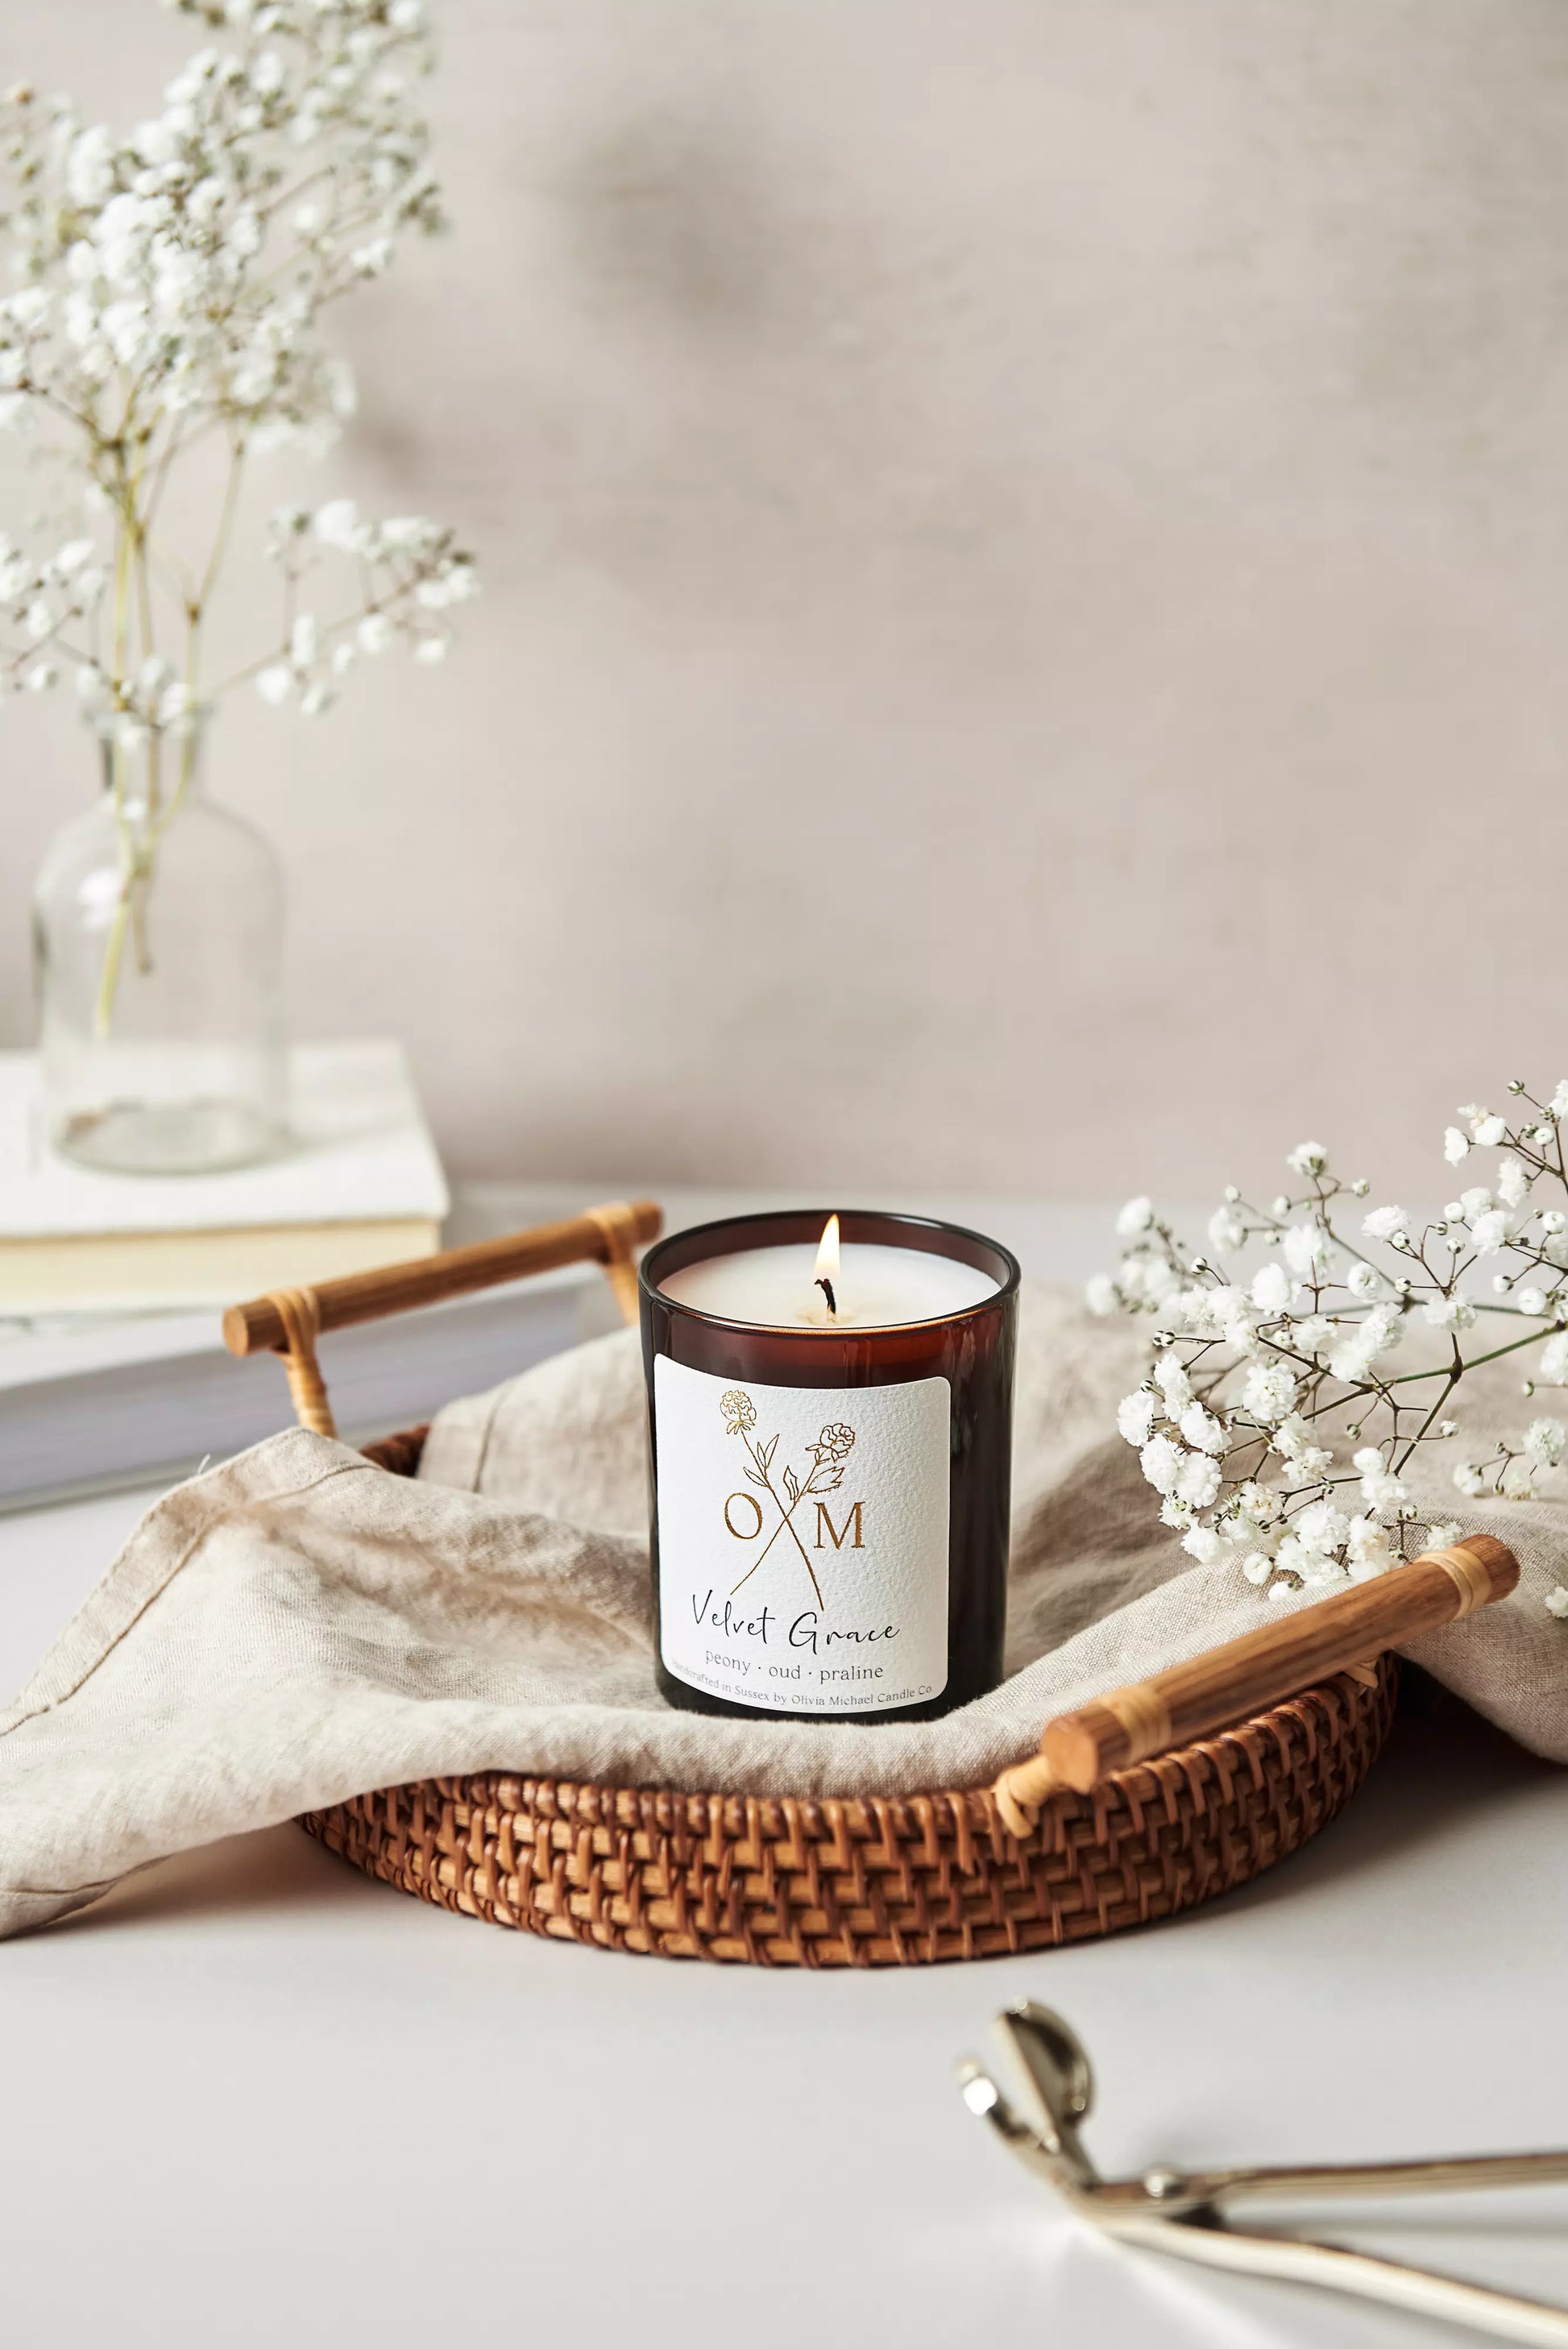 Our peony and oud scented candle is lit and on display in an amber glass jar.